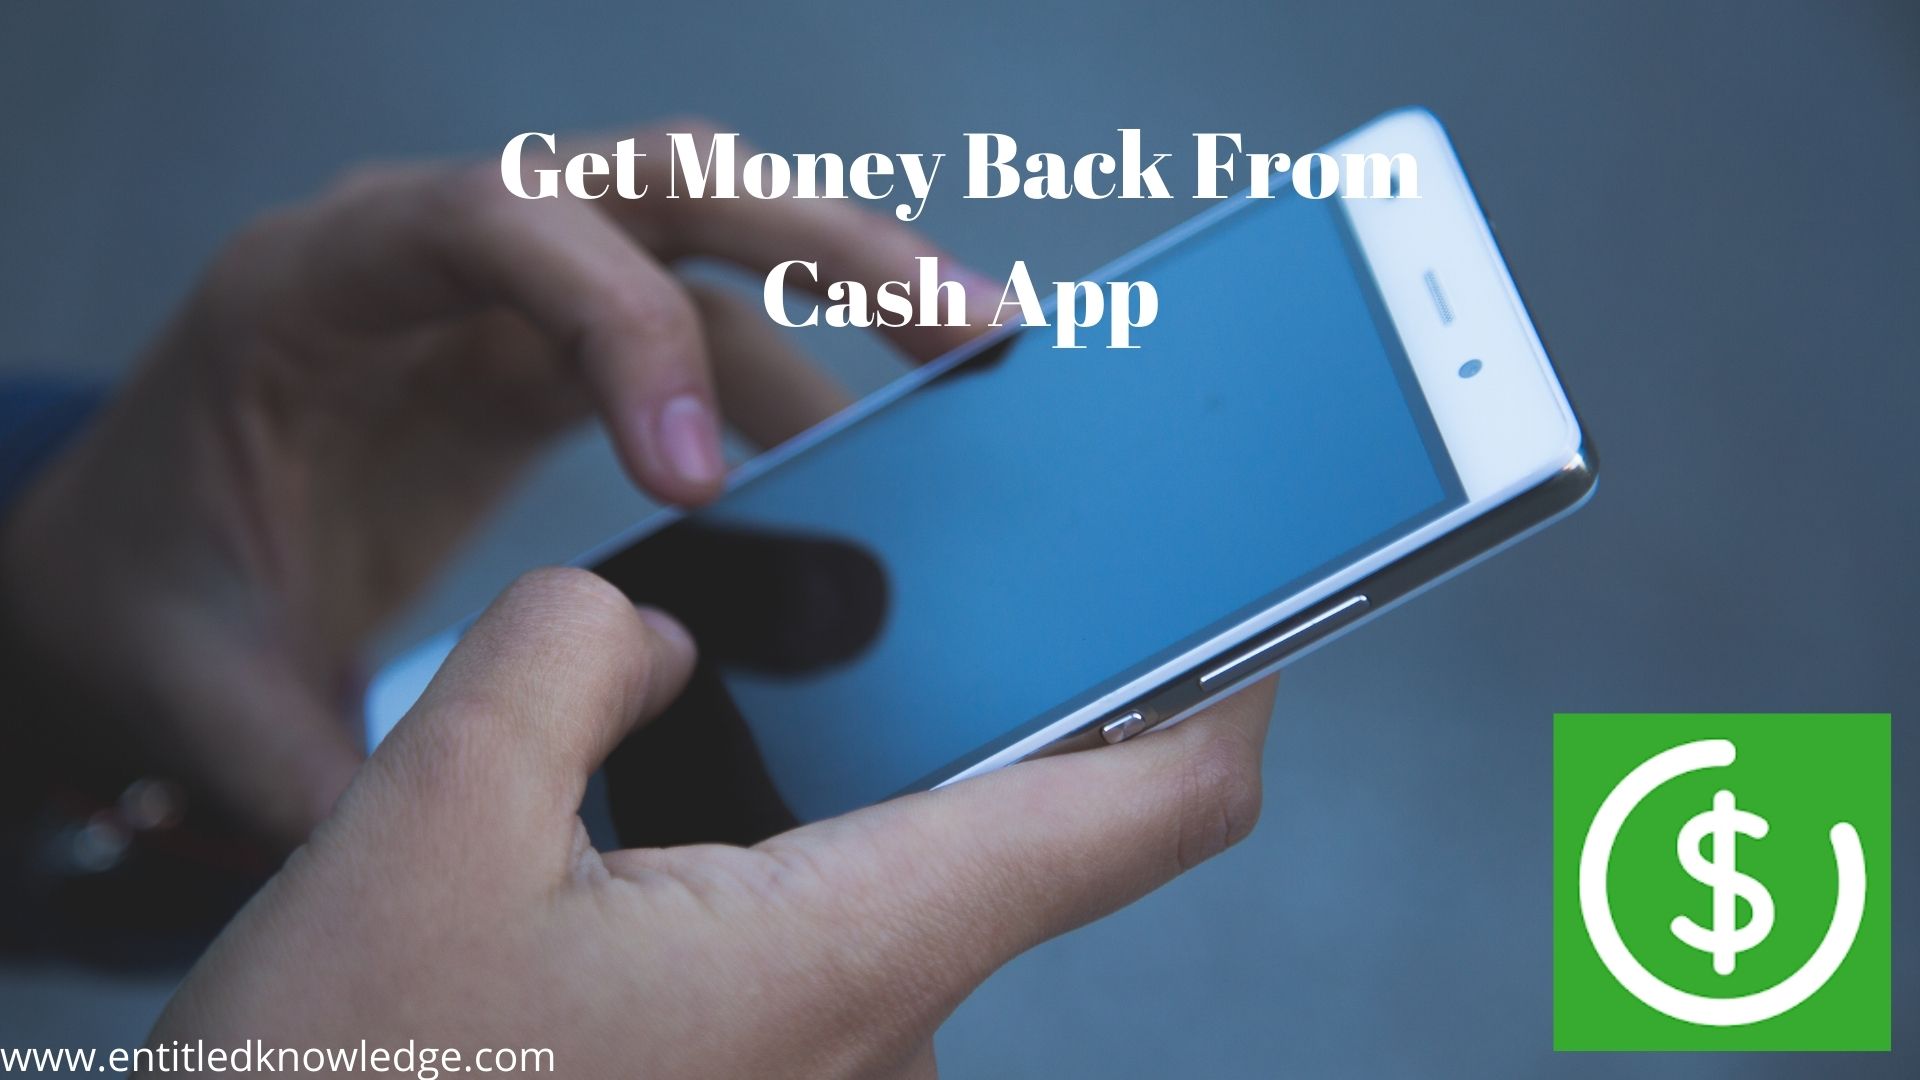 How To Get Money Back From Cash App